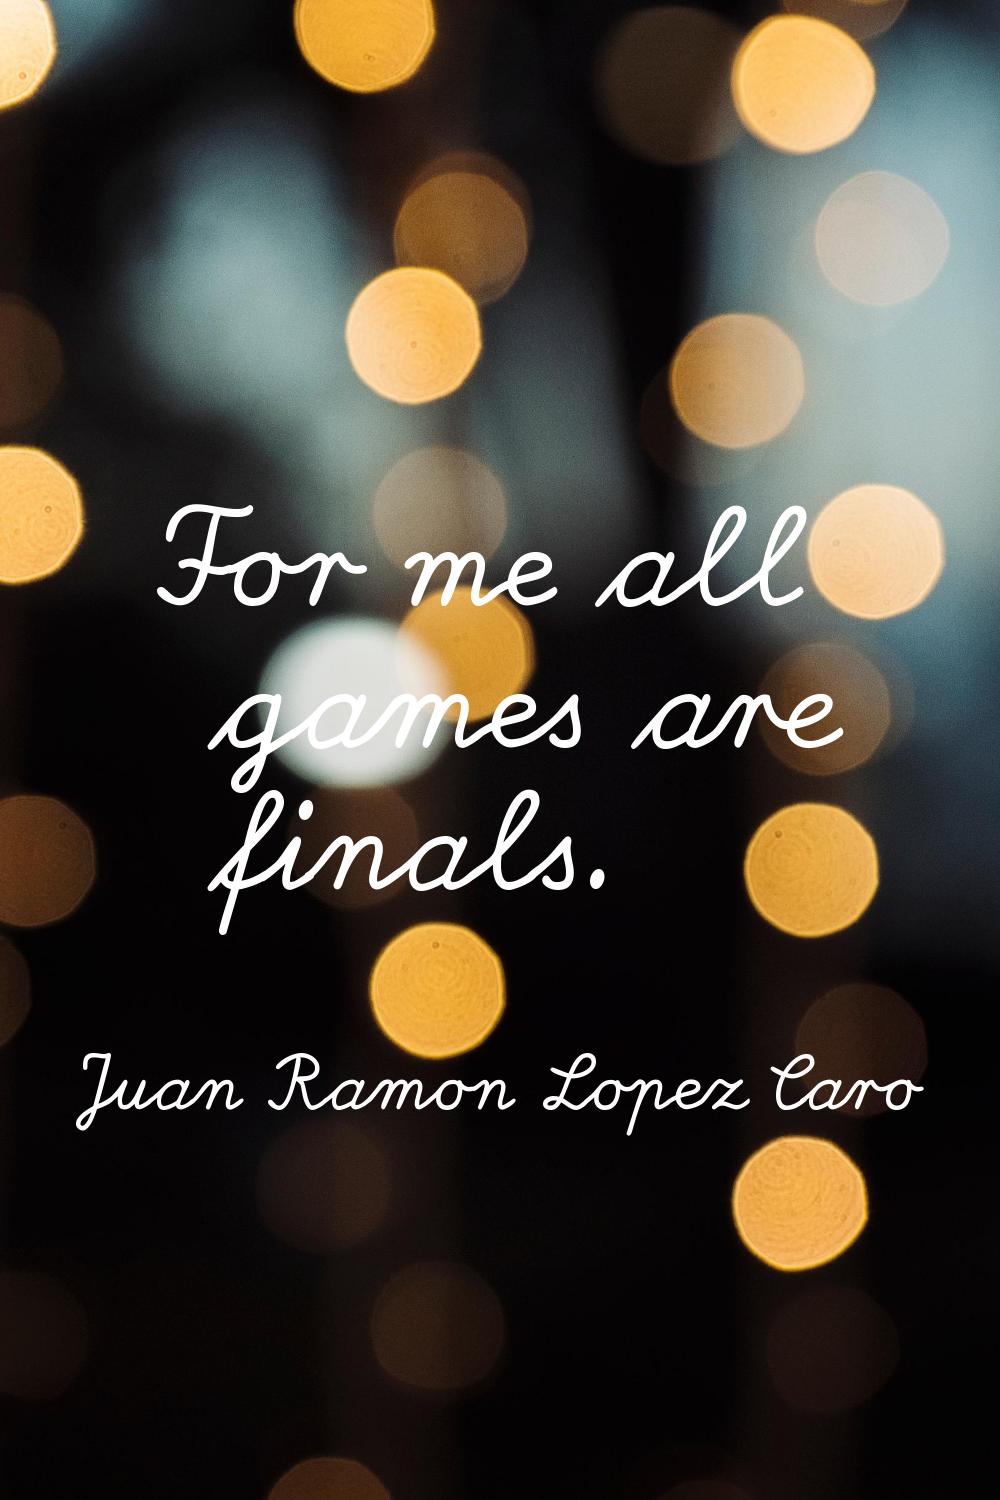 For me all games are finals.